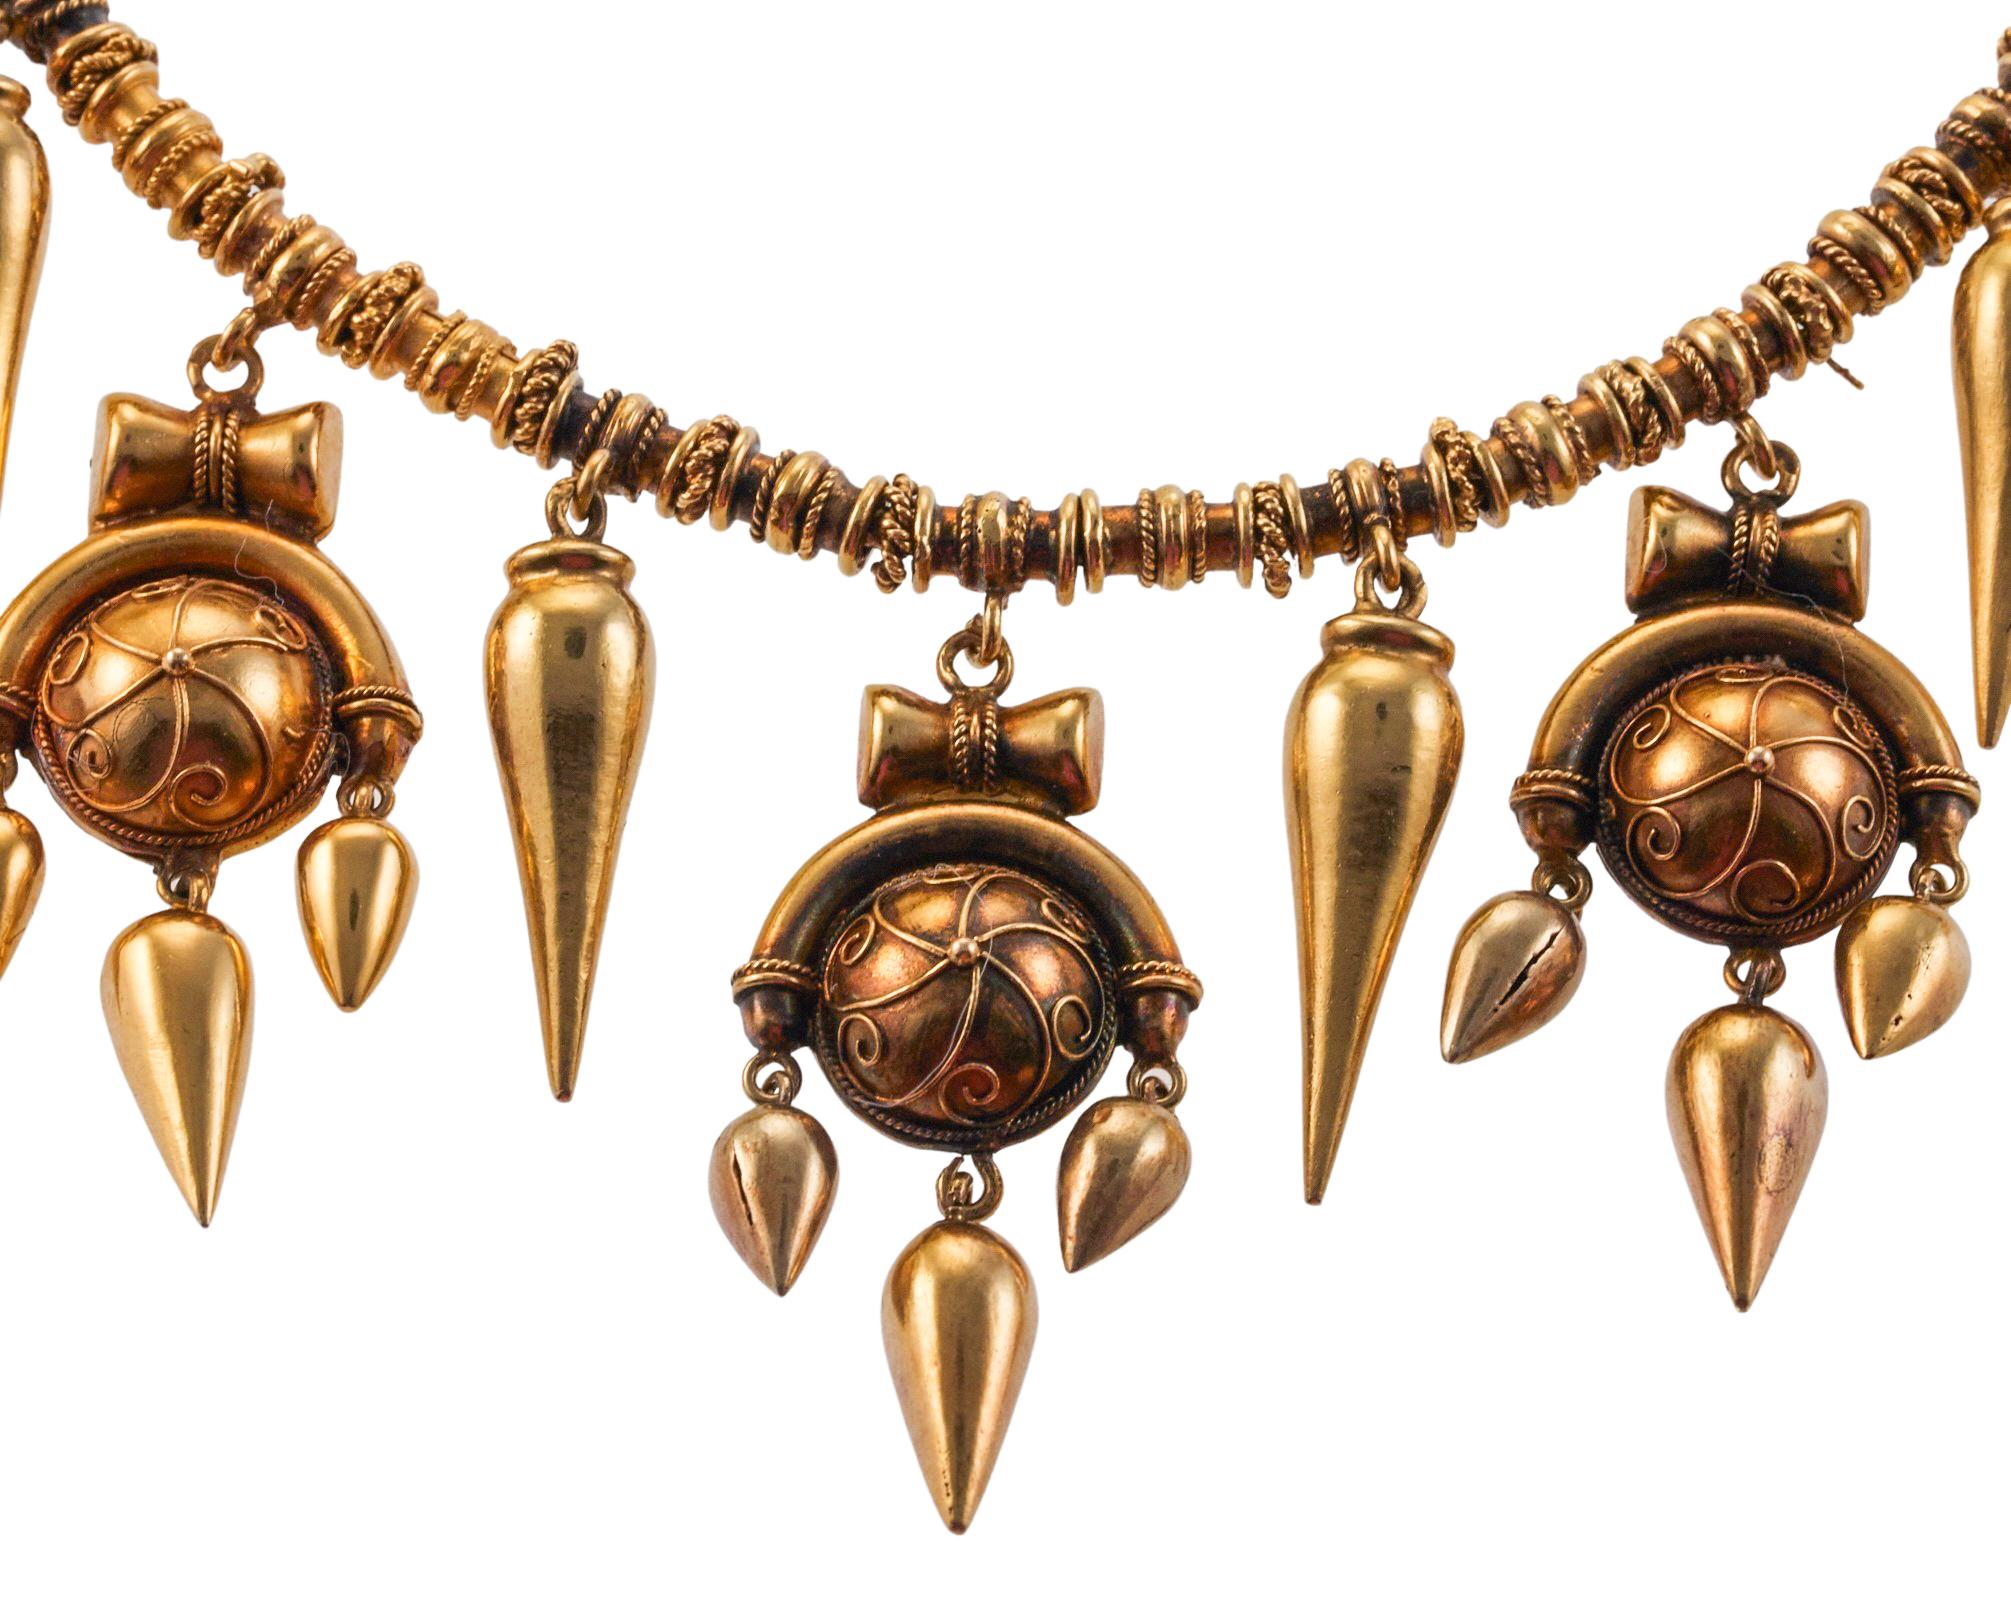 etruscan revival jewelry history